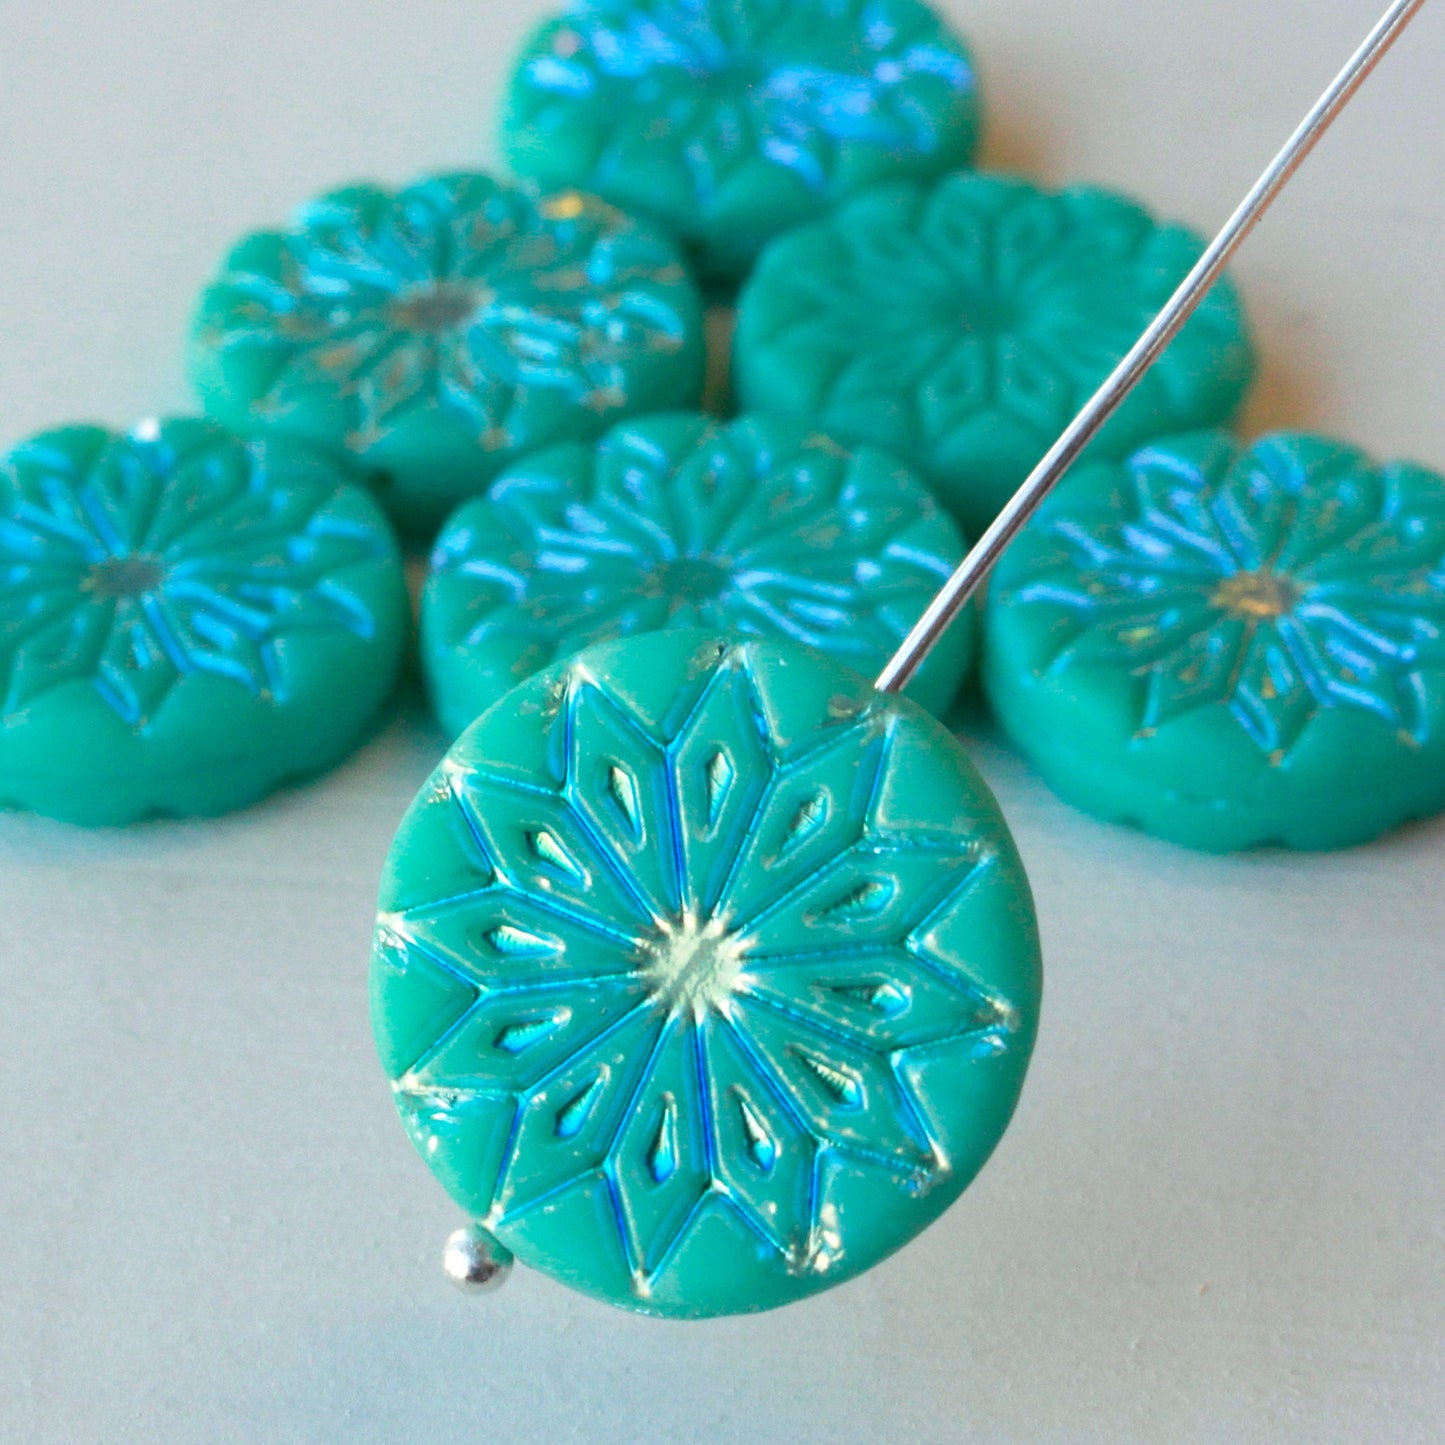 18mm Coin Flower Beads - Turquoise AB - 4 or 12 beads